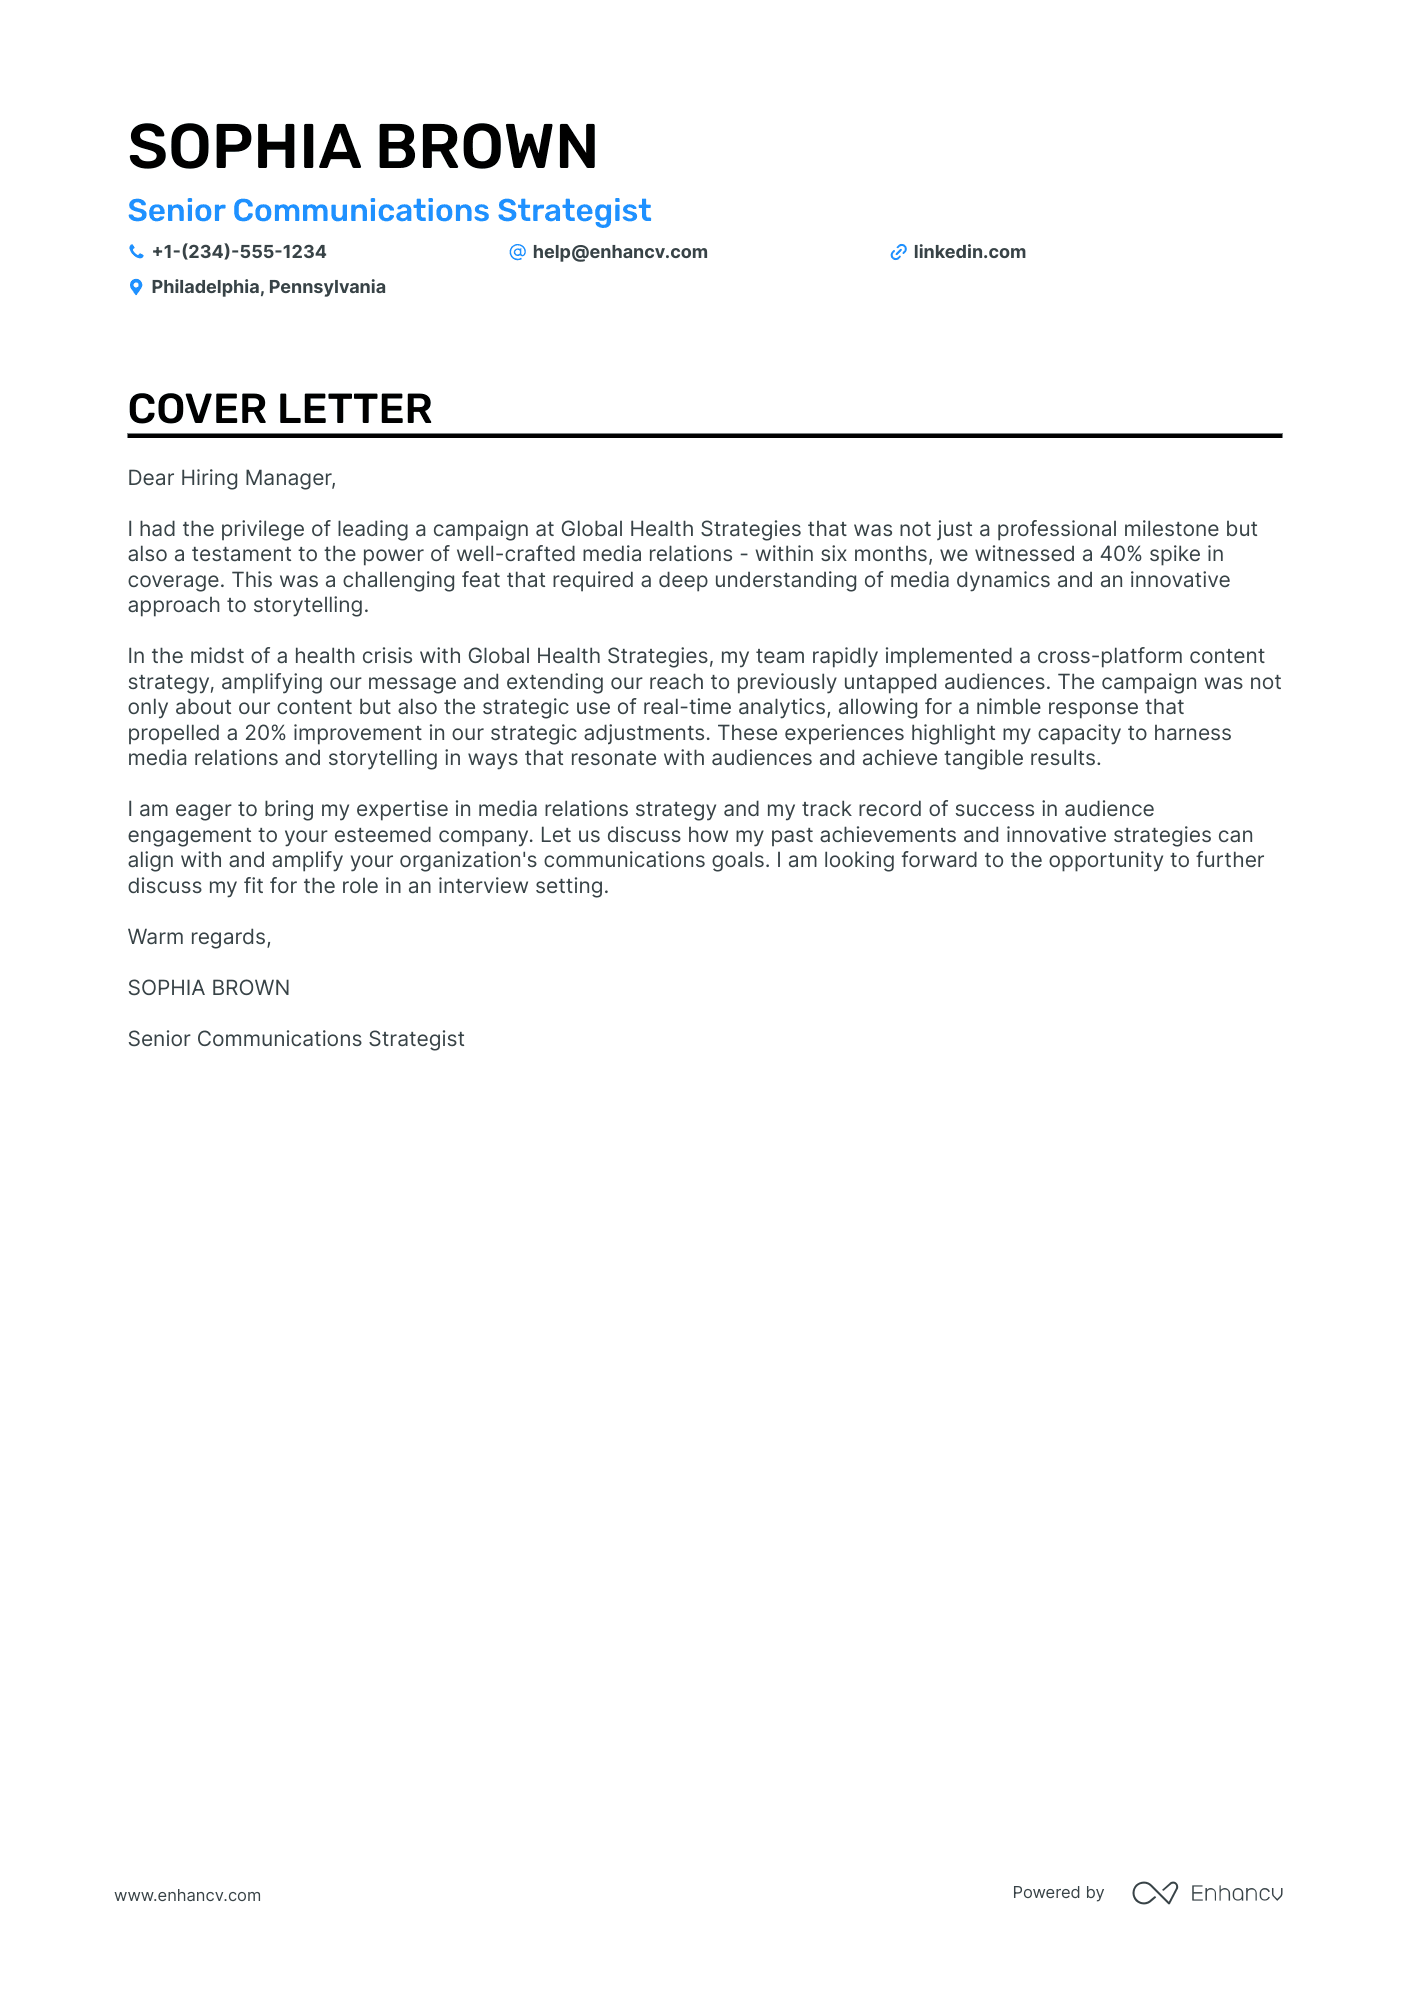 cover letter for journalism job